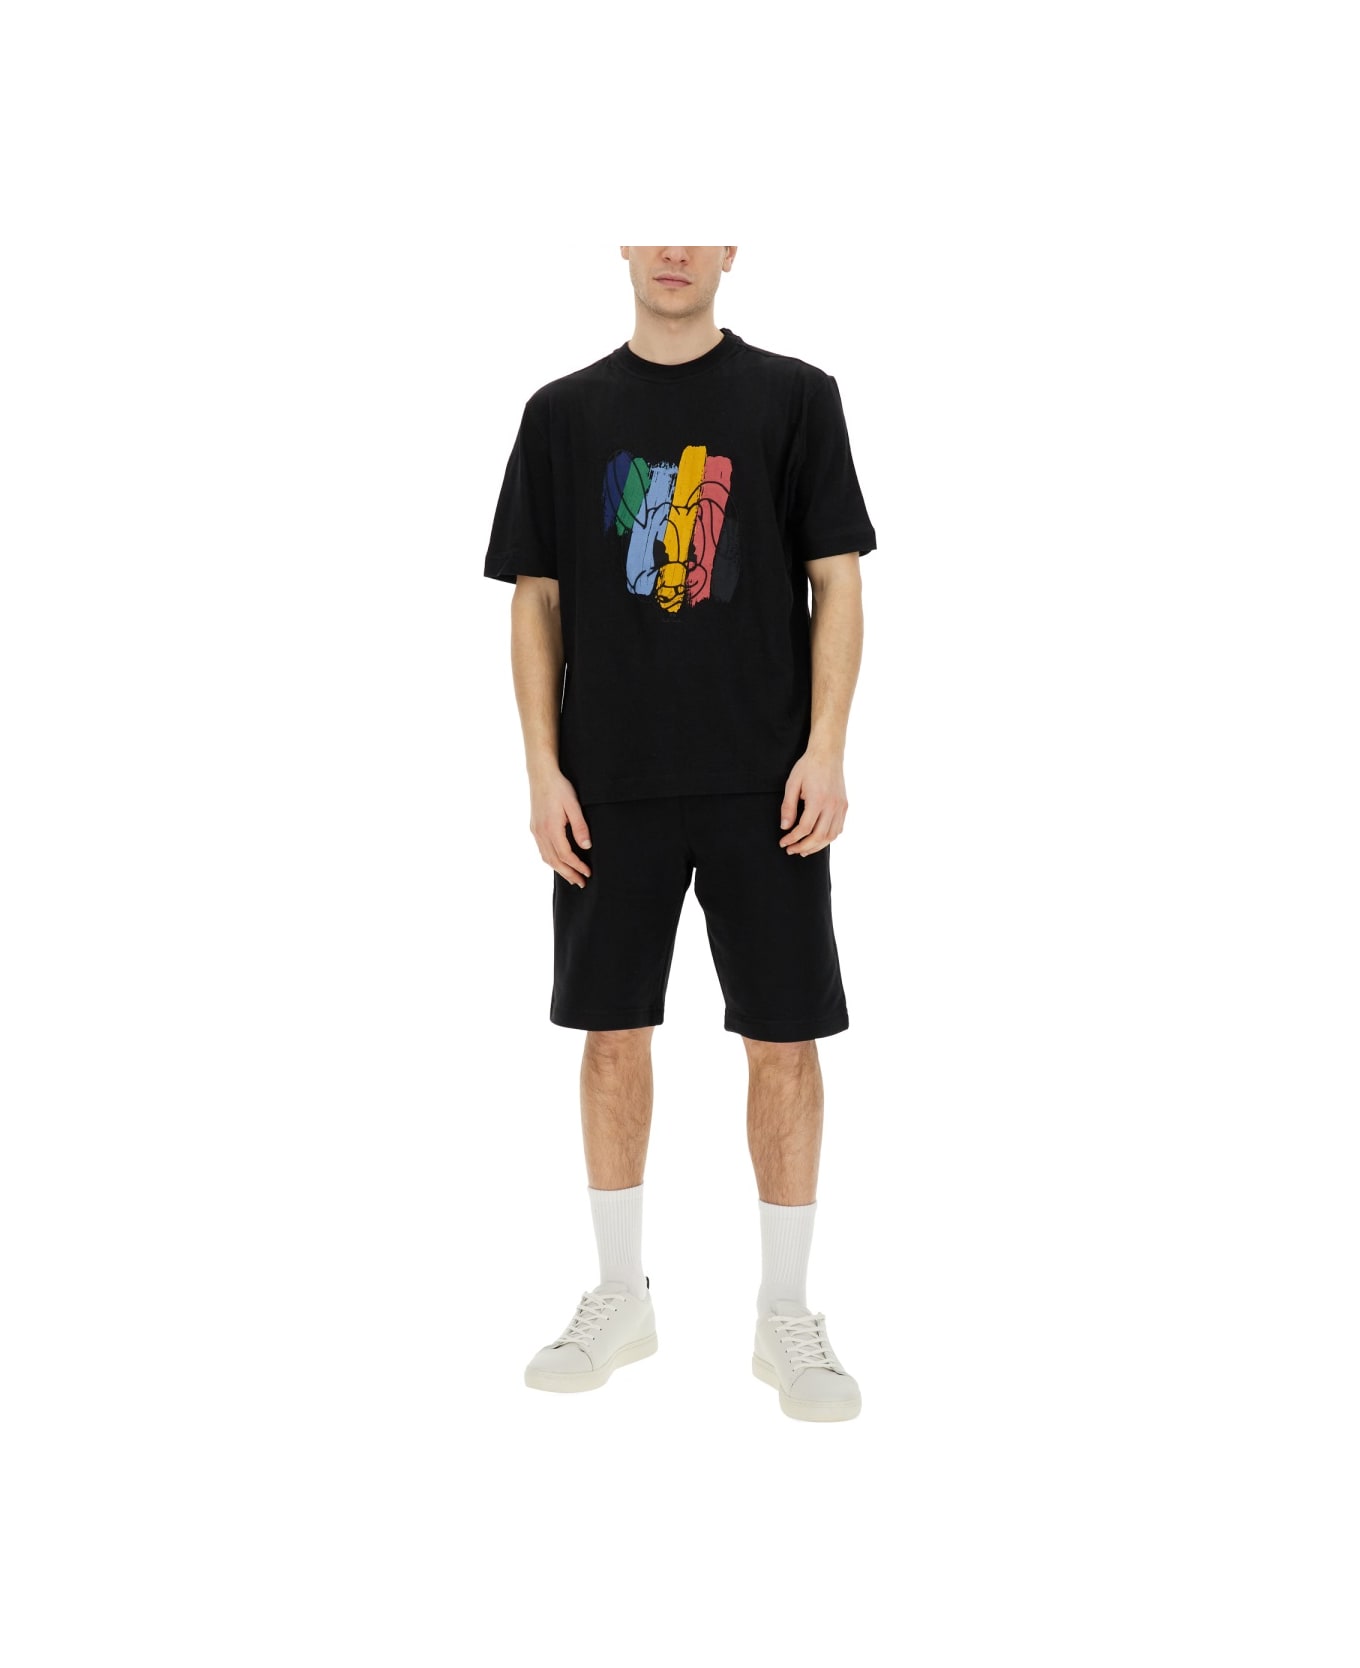 PS by Paul Smith "rabbit" T-shirt - BLACK シャツ